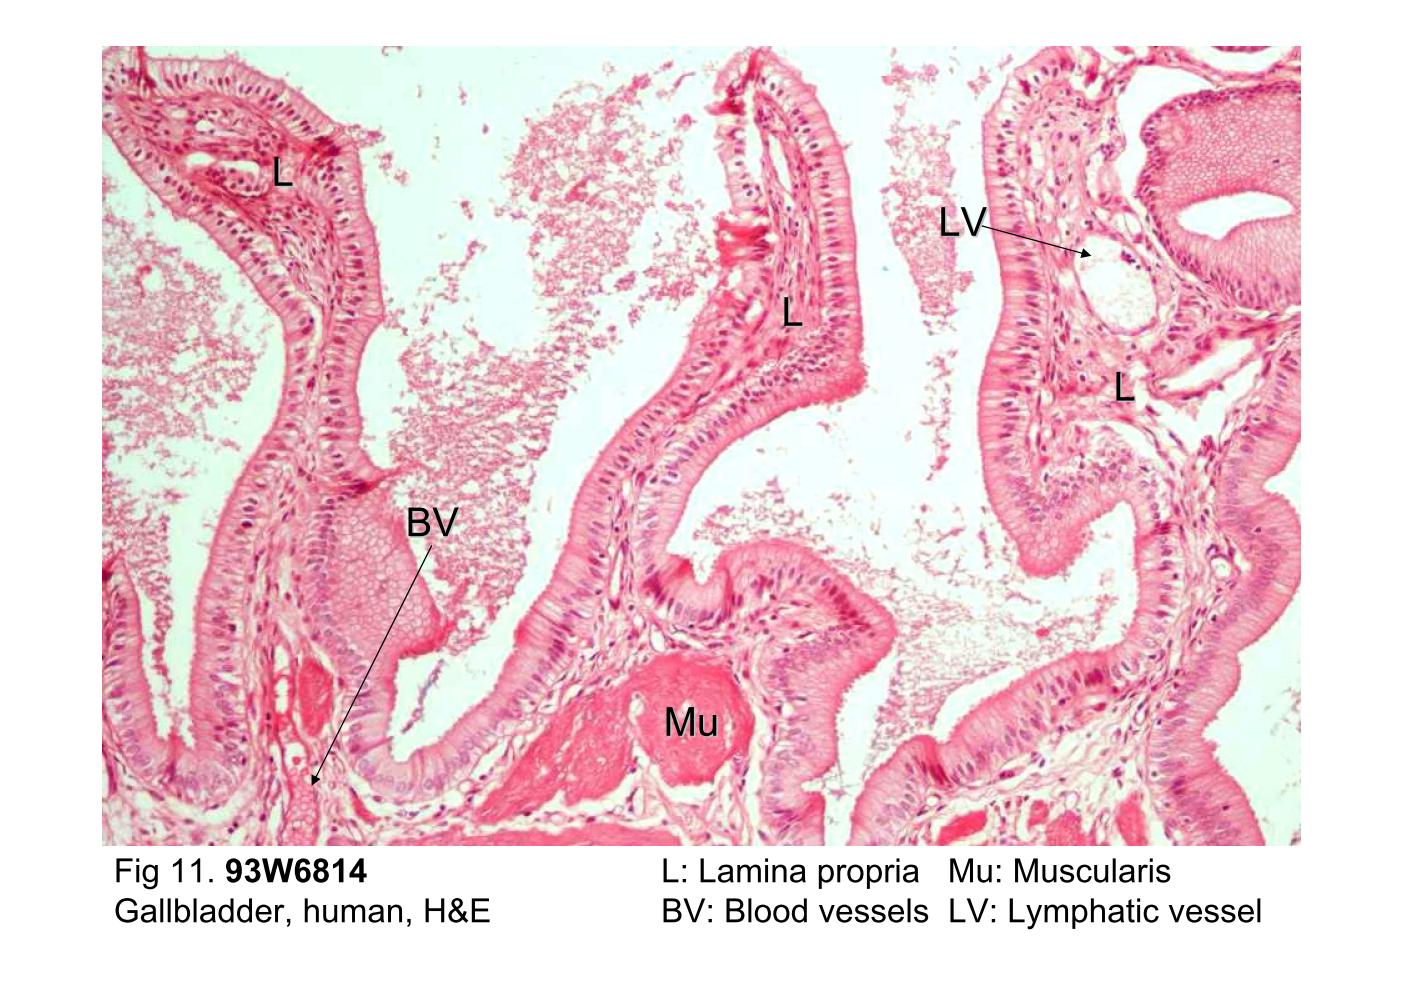 block10-2_25.jpg - Fig 11. 93W6814, Gallbladder, human, H&E.The mucosa consists of a tall simple columnar absorptiveepithelium resting on a lamina propria (L) of loose connectivetissue. Only one cell type, tall columnar cells, is present in theepithelial layer. The nuclei are in the basal portion of the cell.The cells possess a thin apical striated border. The laminapropria underlying the epithelium is usually very cellularcontaining lymphocytes, the blood vessel (BV) and lymphaticvessels (LV).